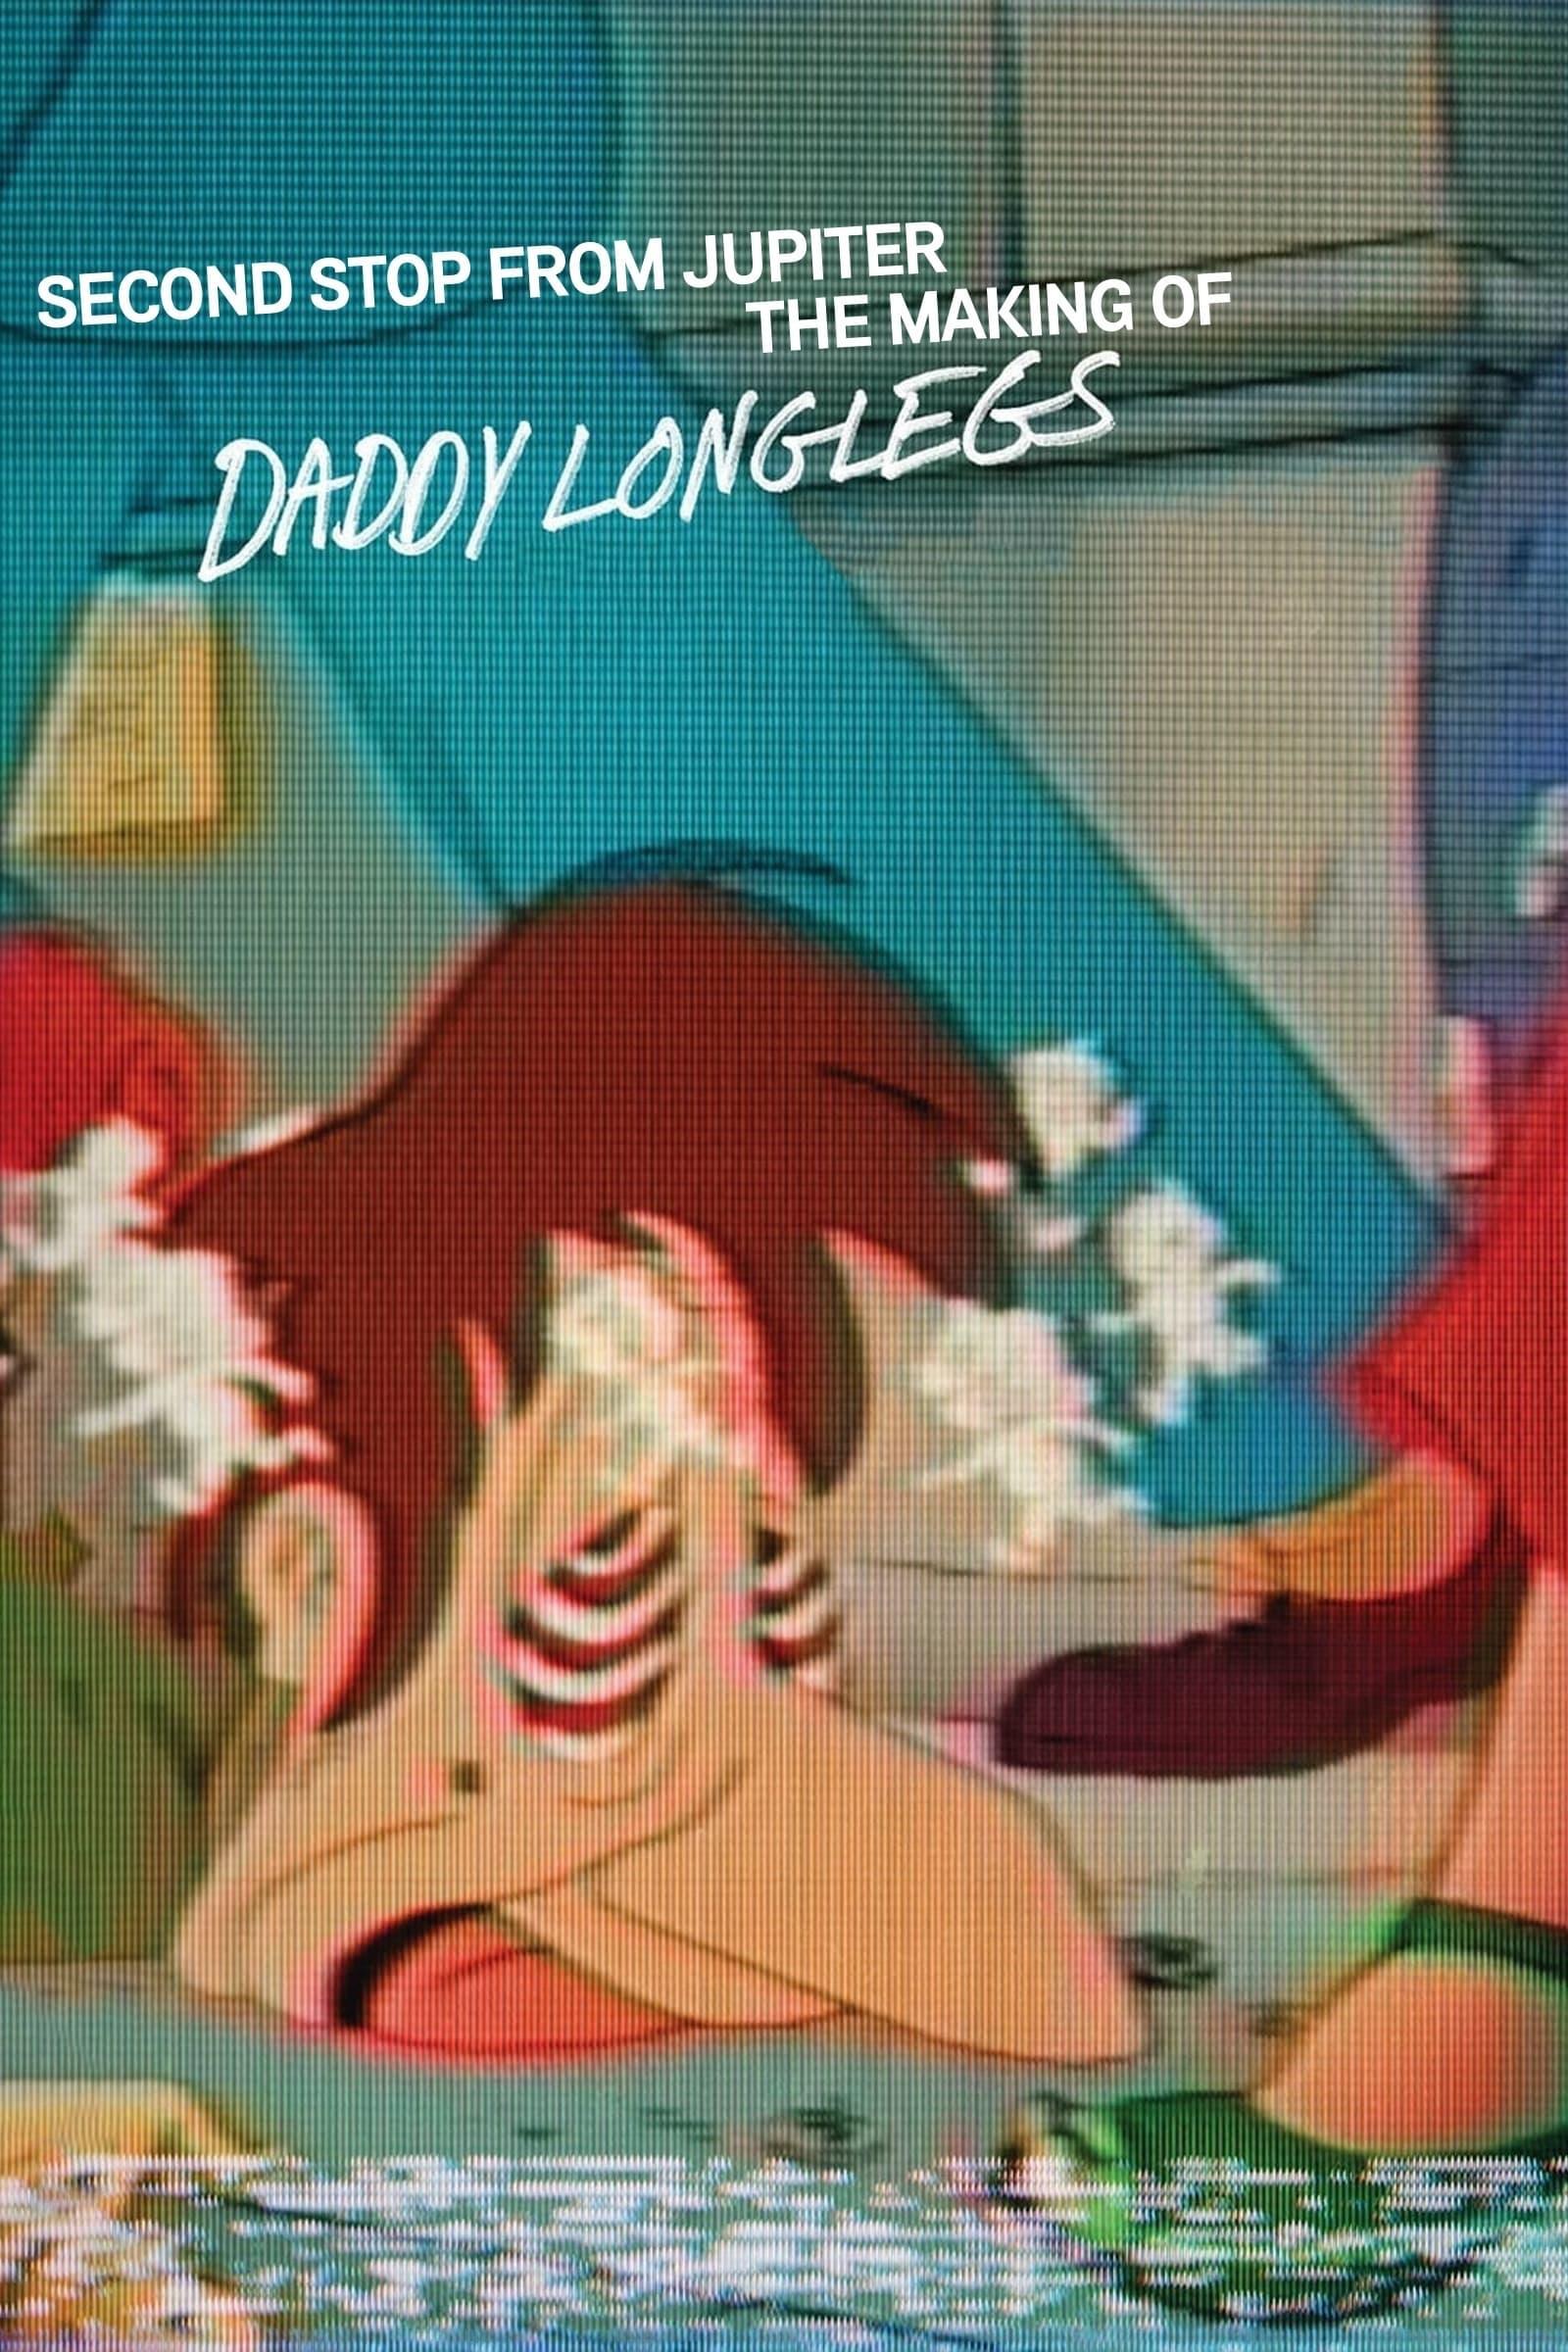 Second Stop from Jupiter: The Making of Daddy Longlegs poster